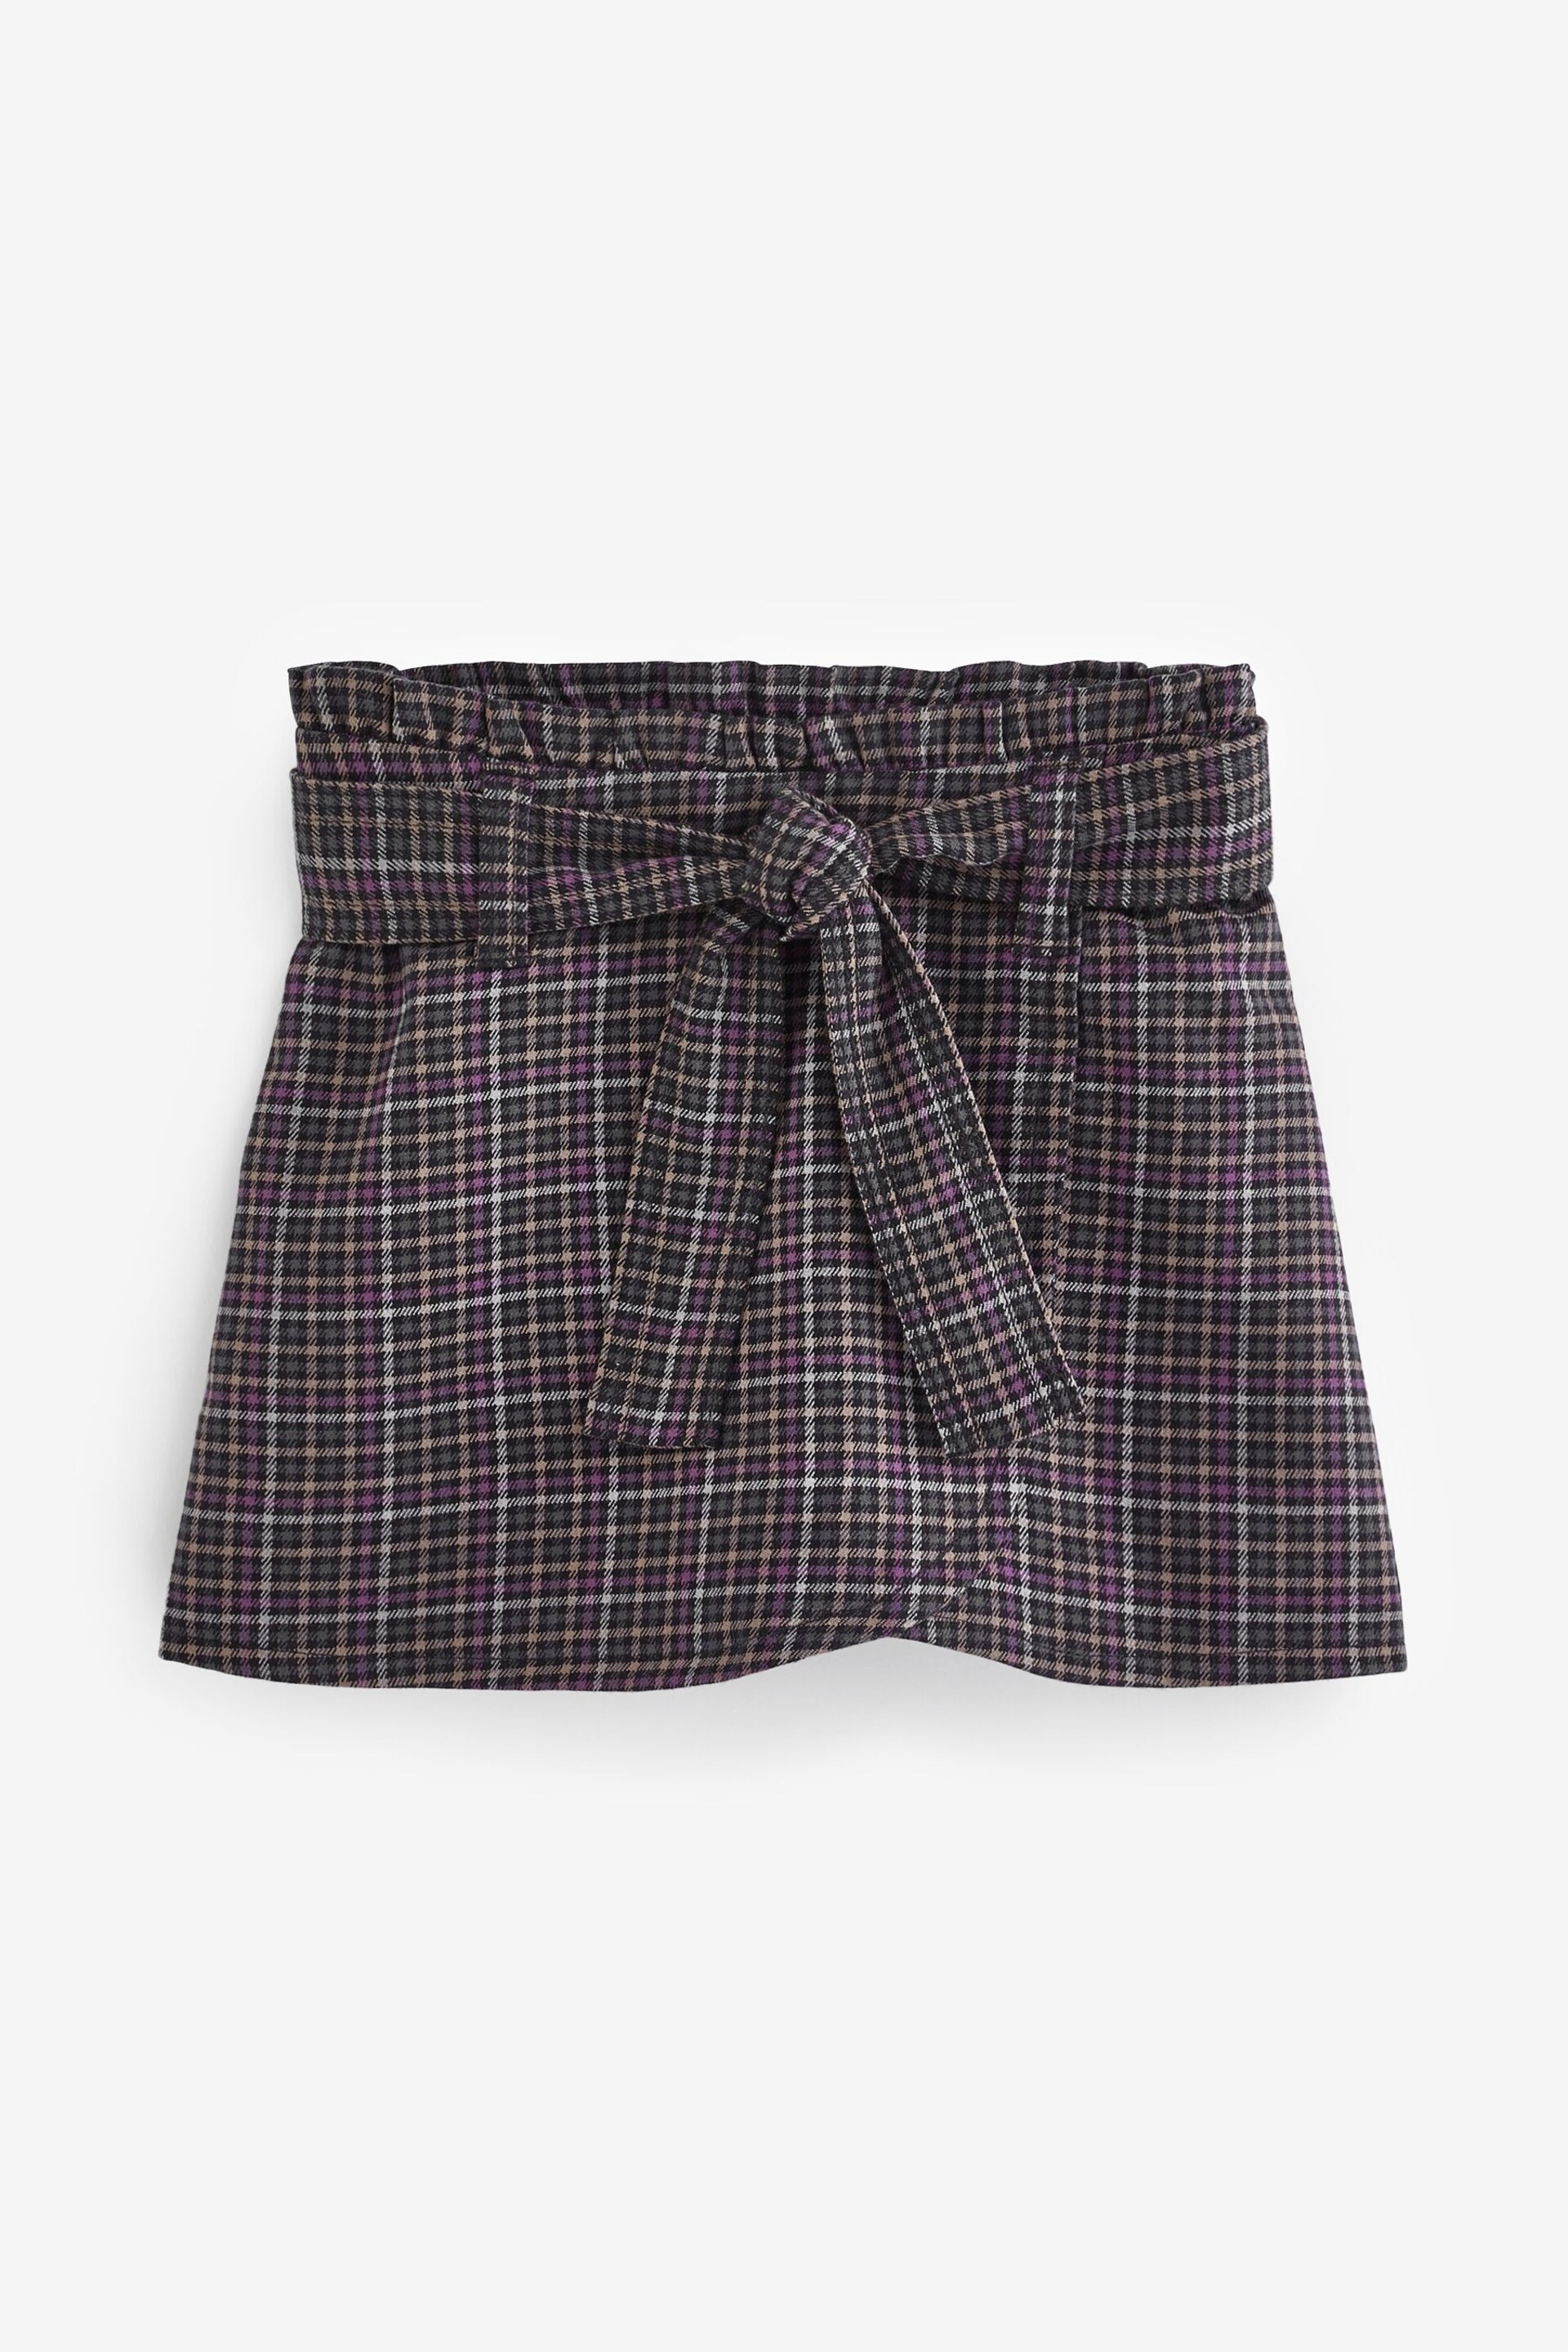 Abercrombie & Fitch Grey Checked Belted Mini Short Skirt - Image 3 of 6